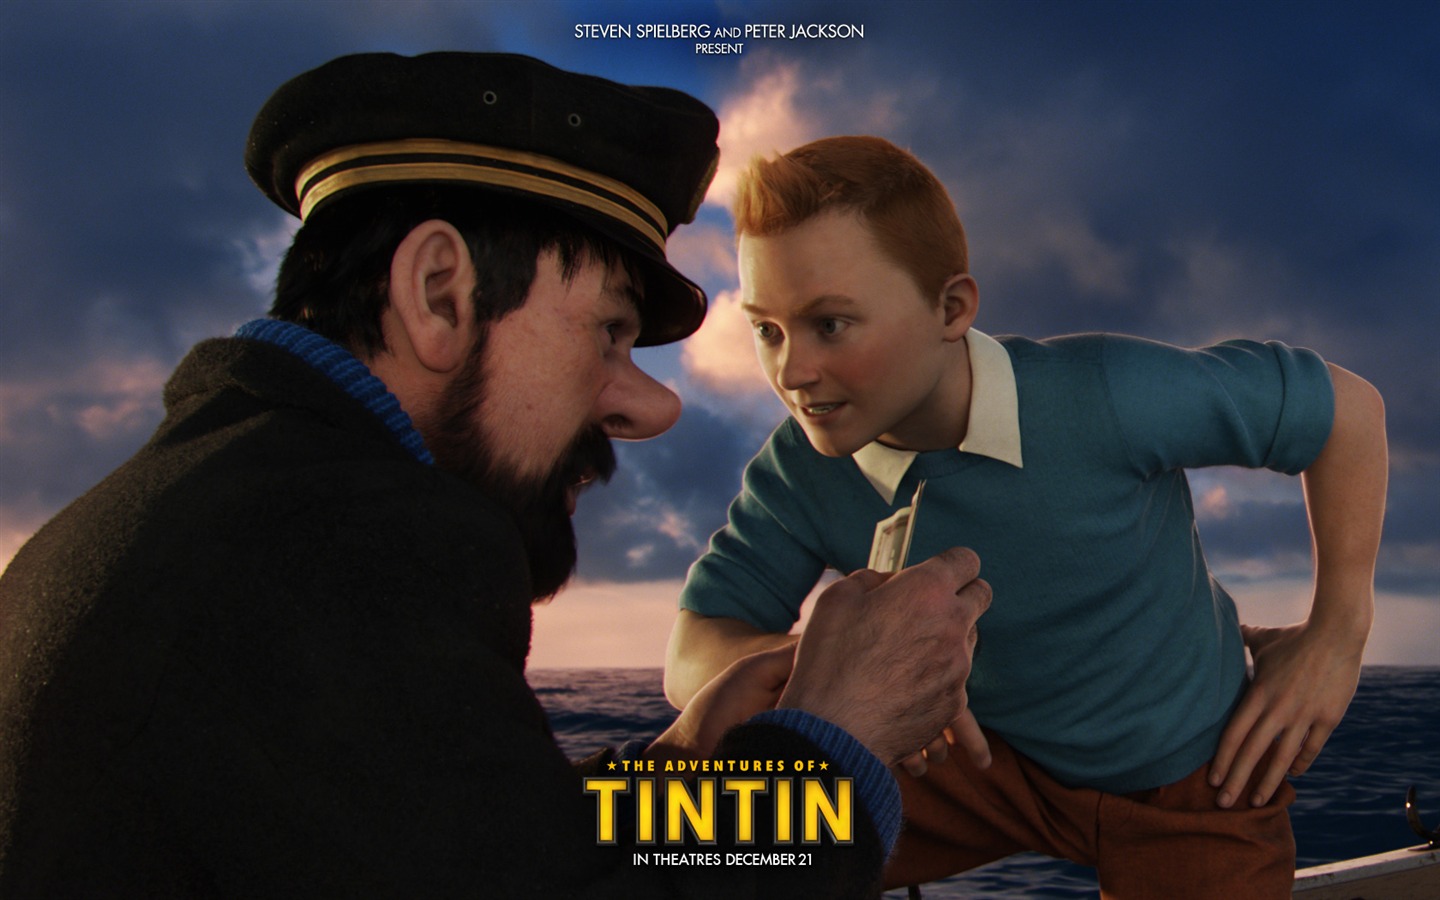 The Adventures of Tintin HD Wallpapers #9 - 1440x900